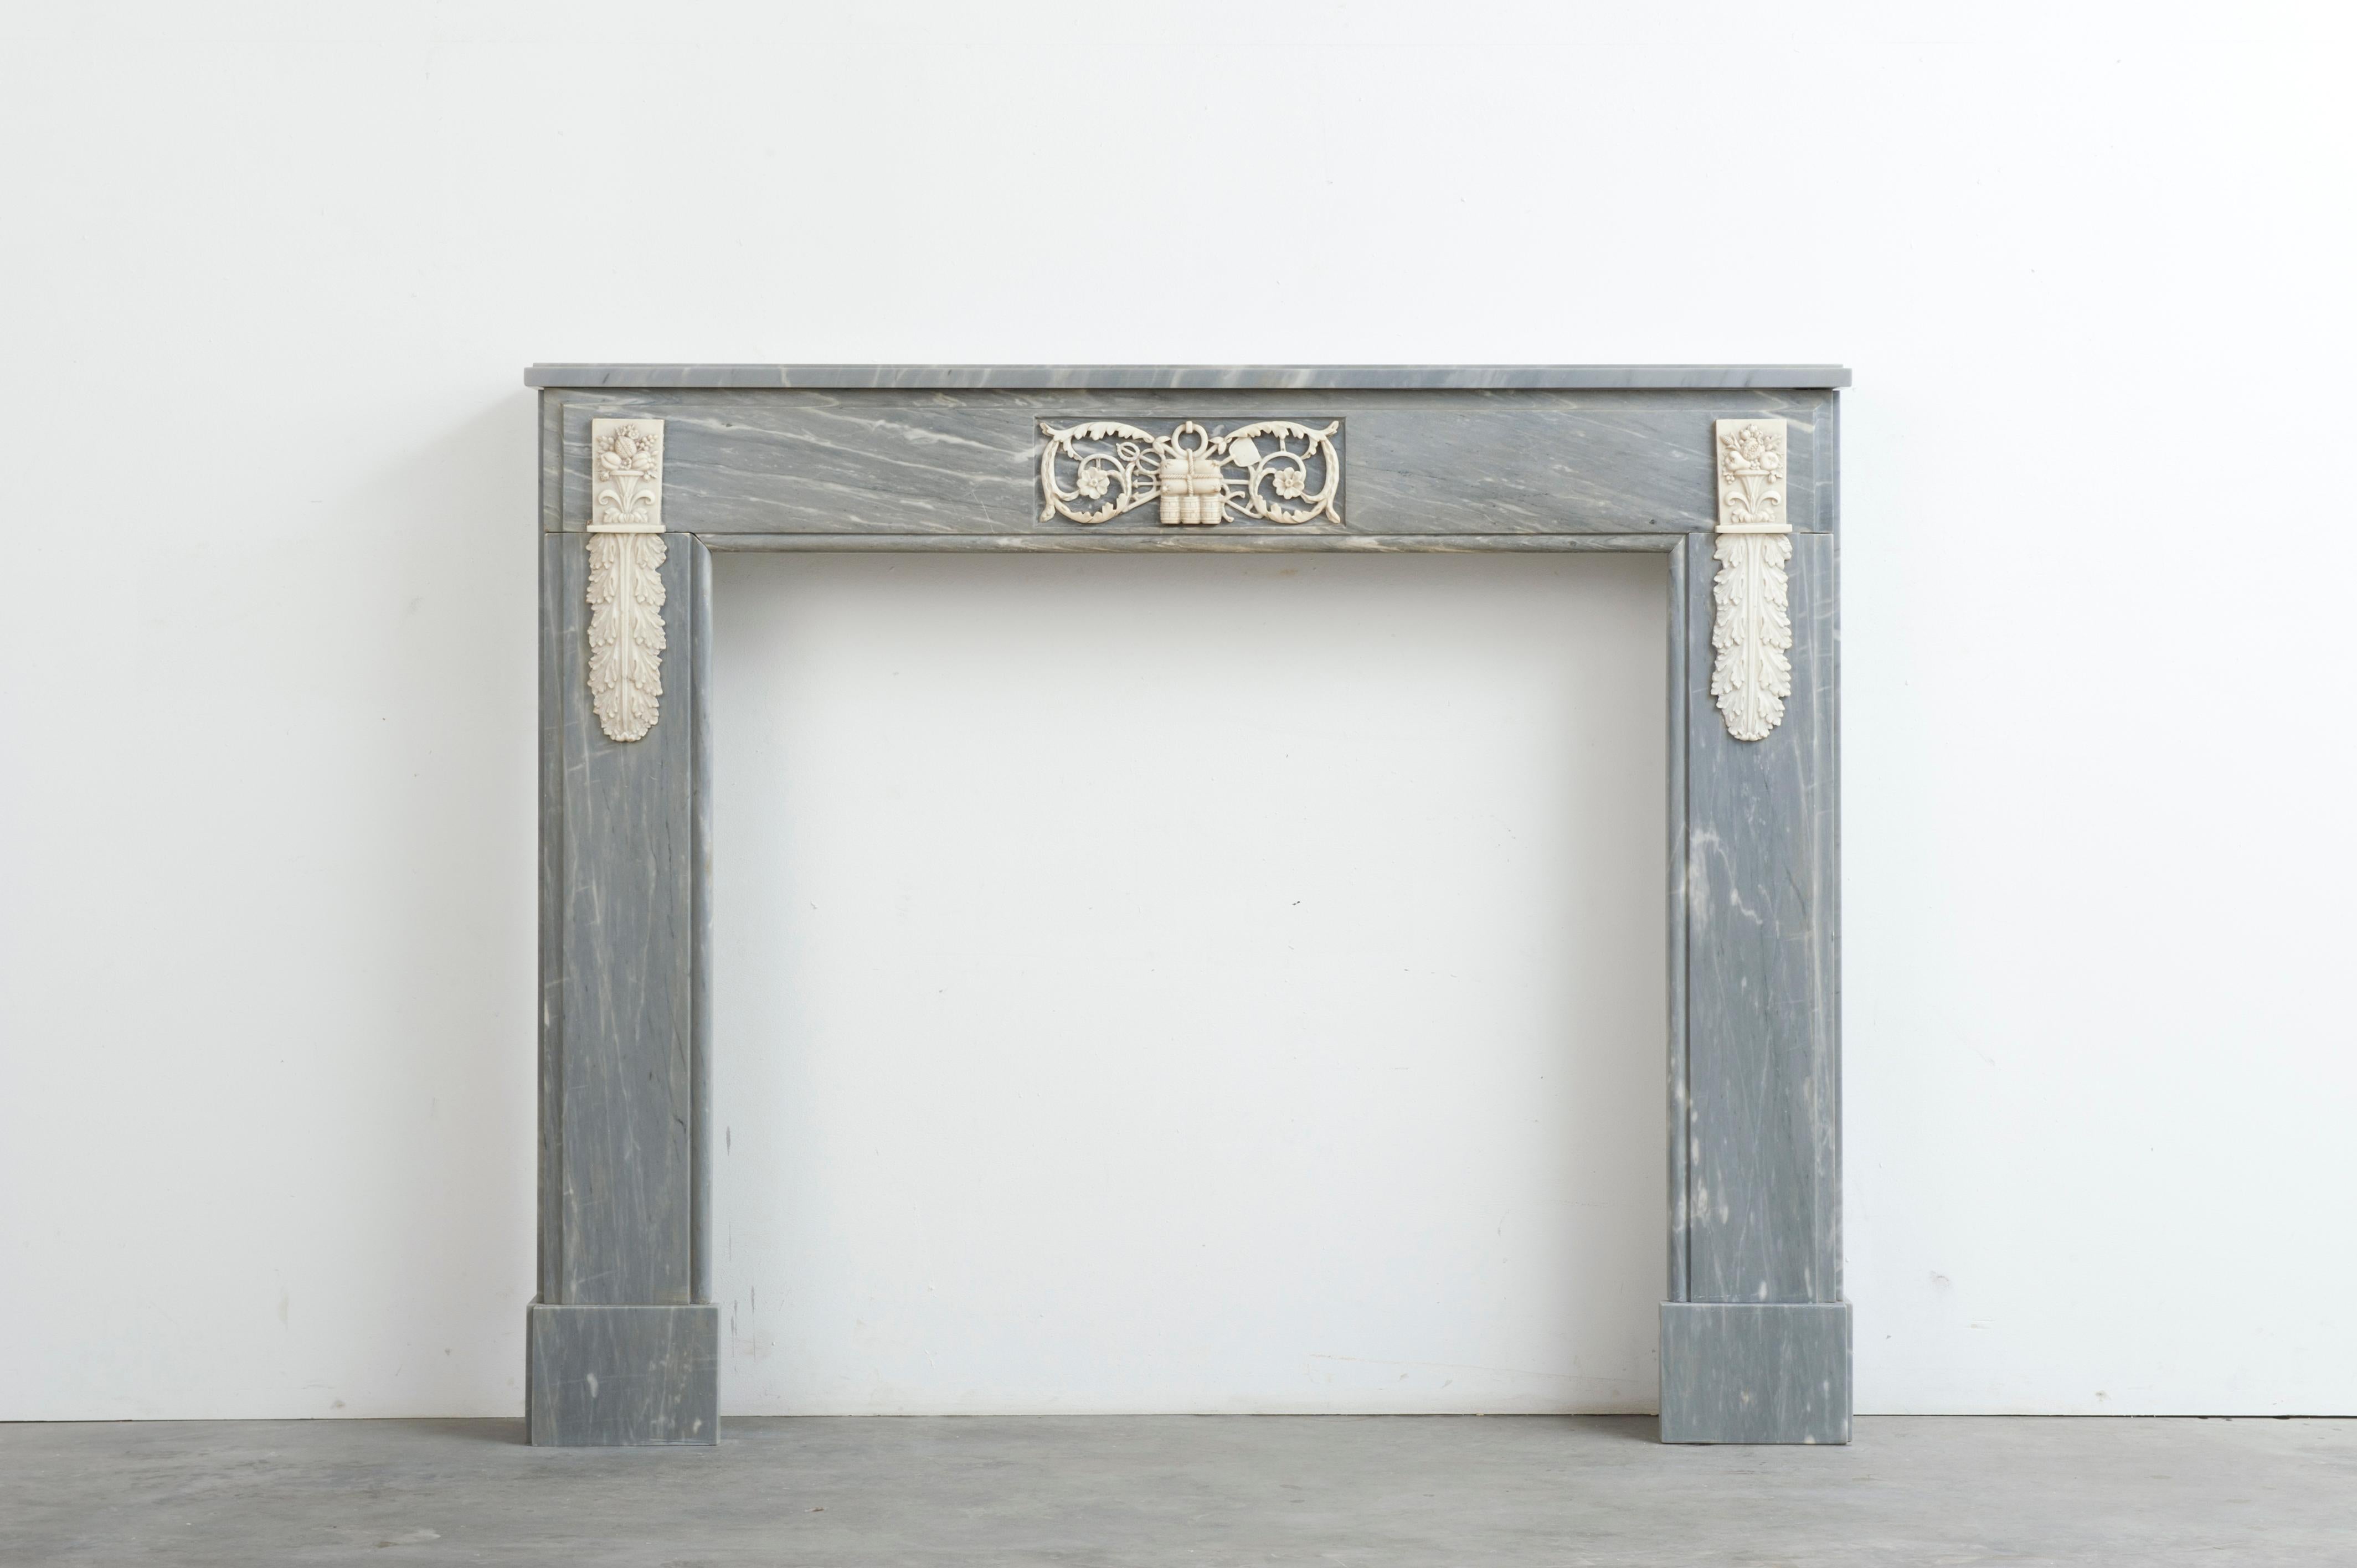 An early 19th/ late 18th century Dutch fireplace mantel in the Louis XVI manner.
The nice mantel has great proportions and is wonderfully decorated in 